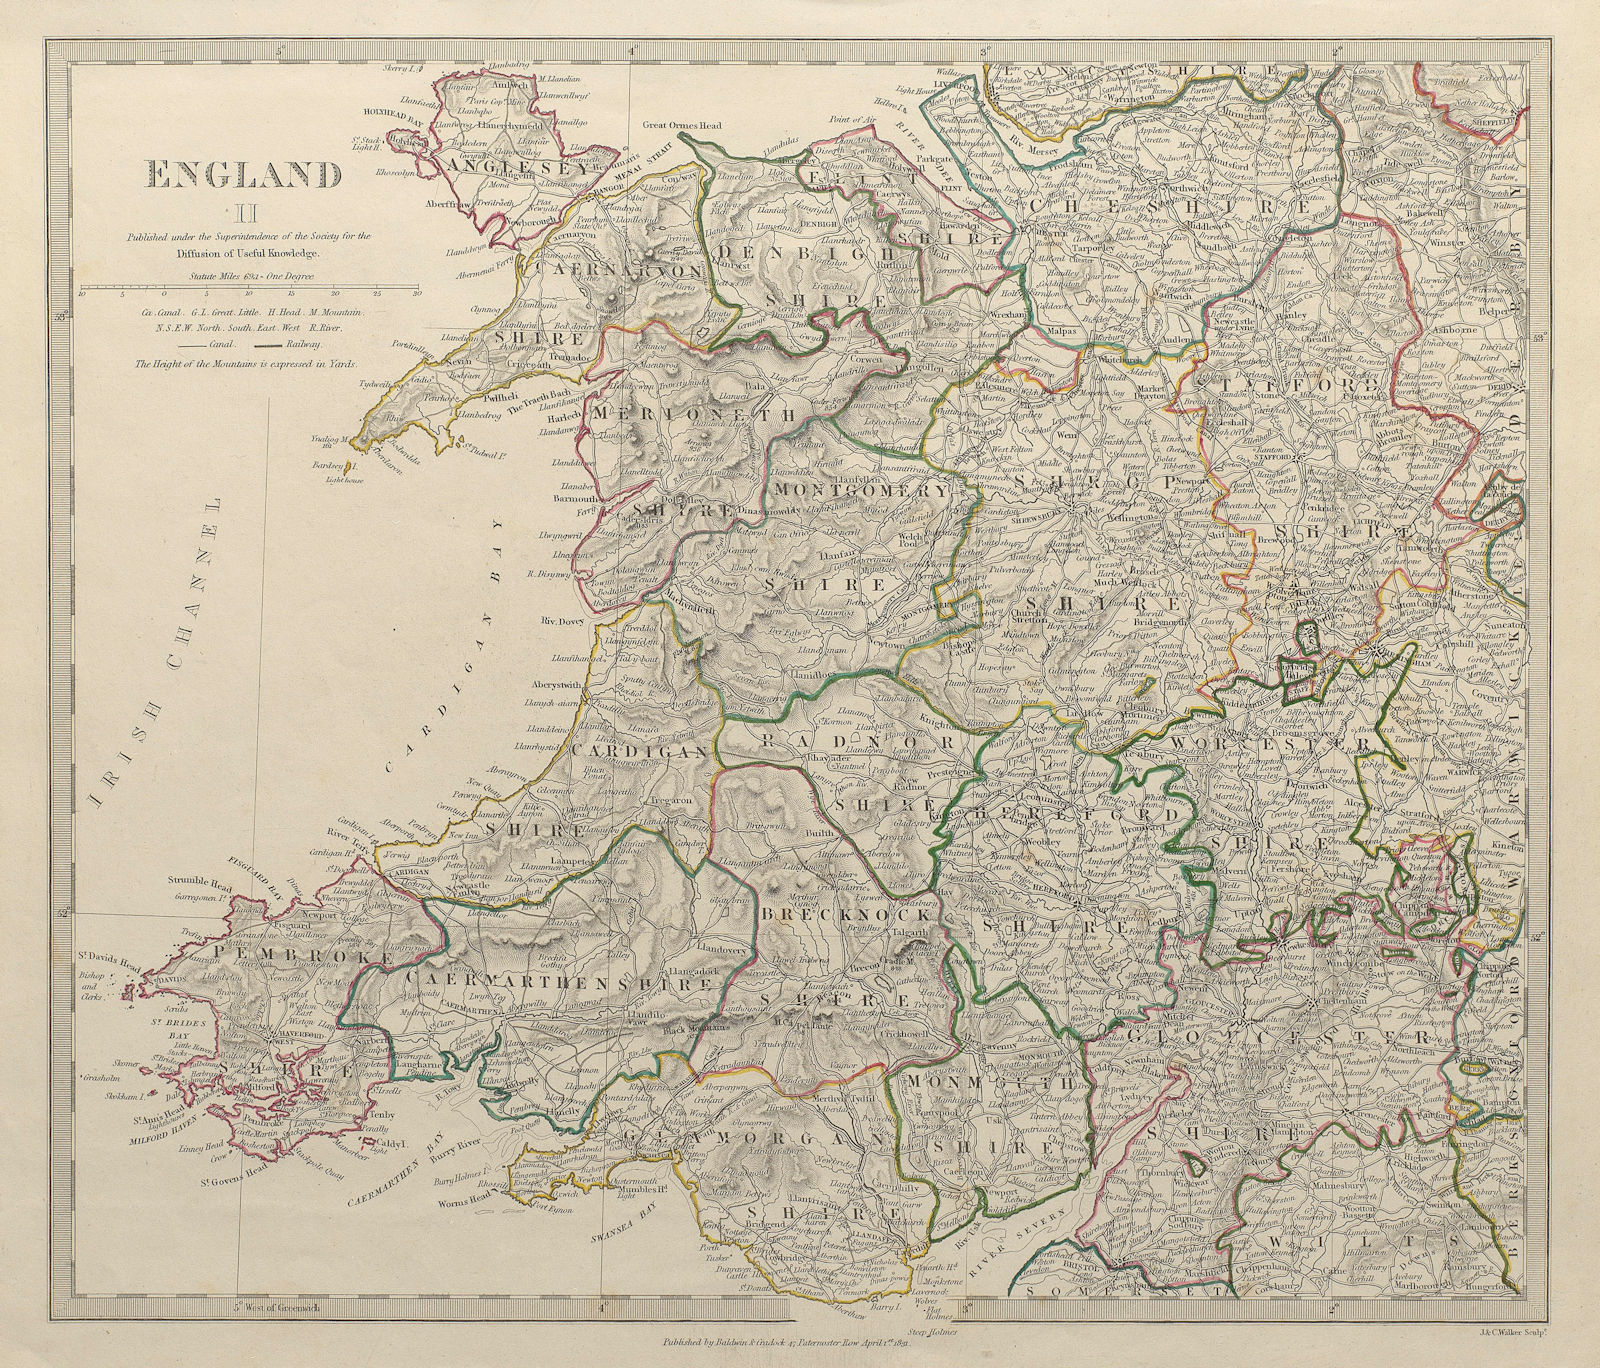 WALES & ENGLAND WEST MIDLANDS. Showing counties. Original colour.SDUK 1844 map